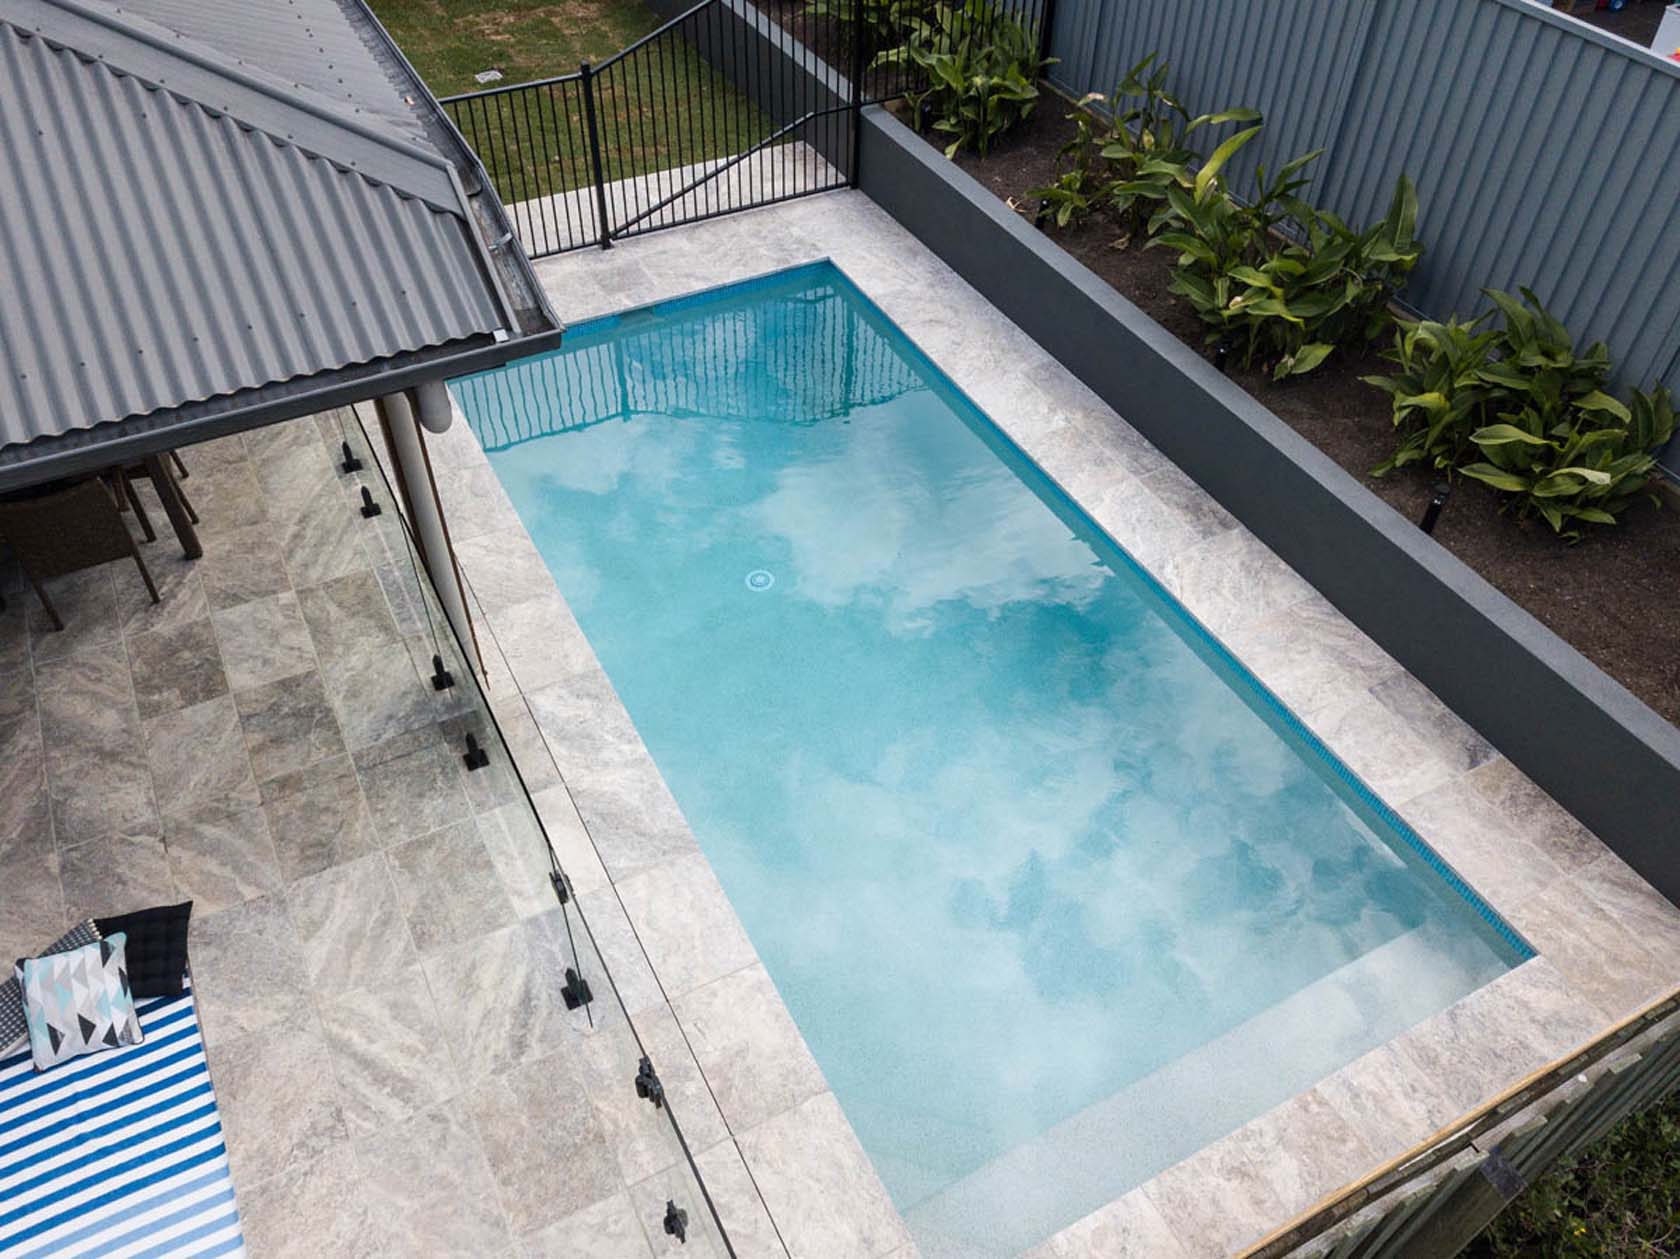 Silver Travertine pool coping and surround tiles